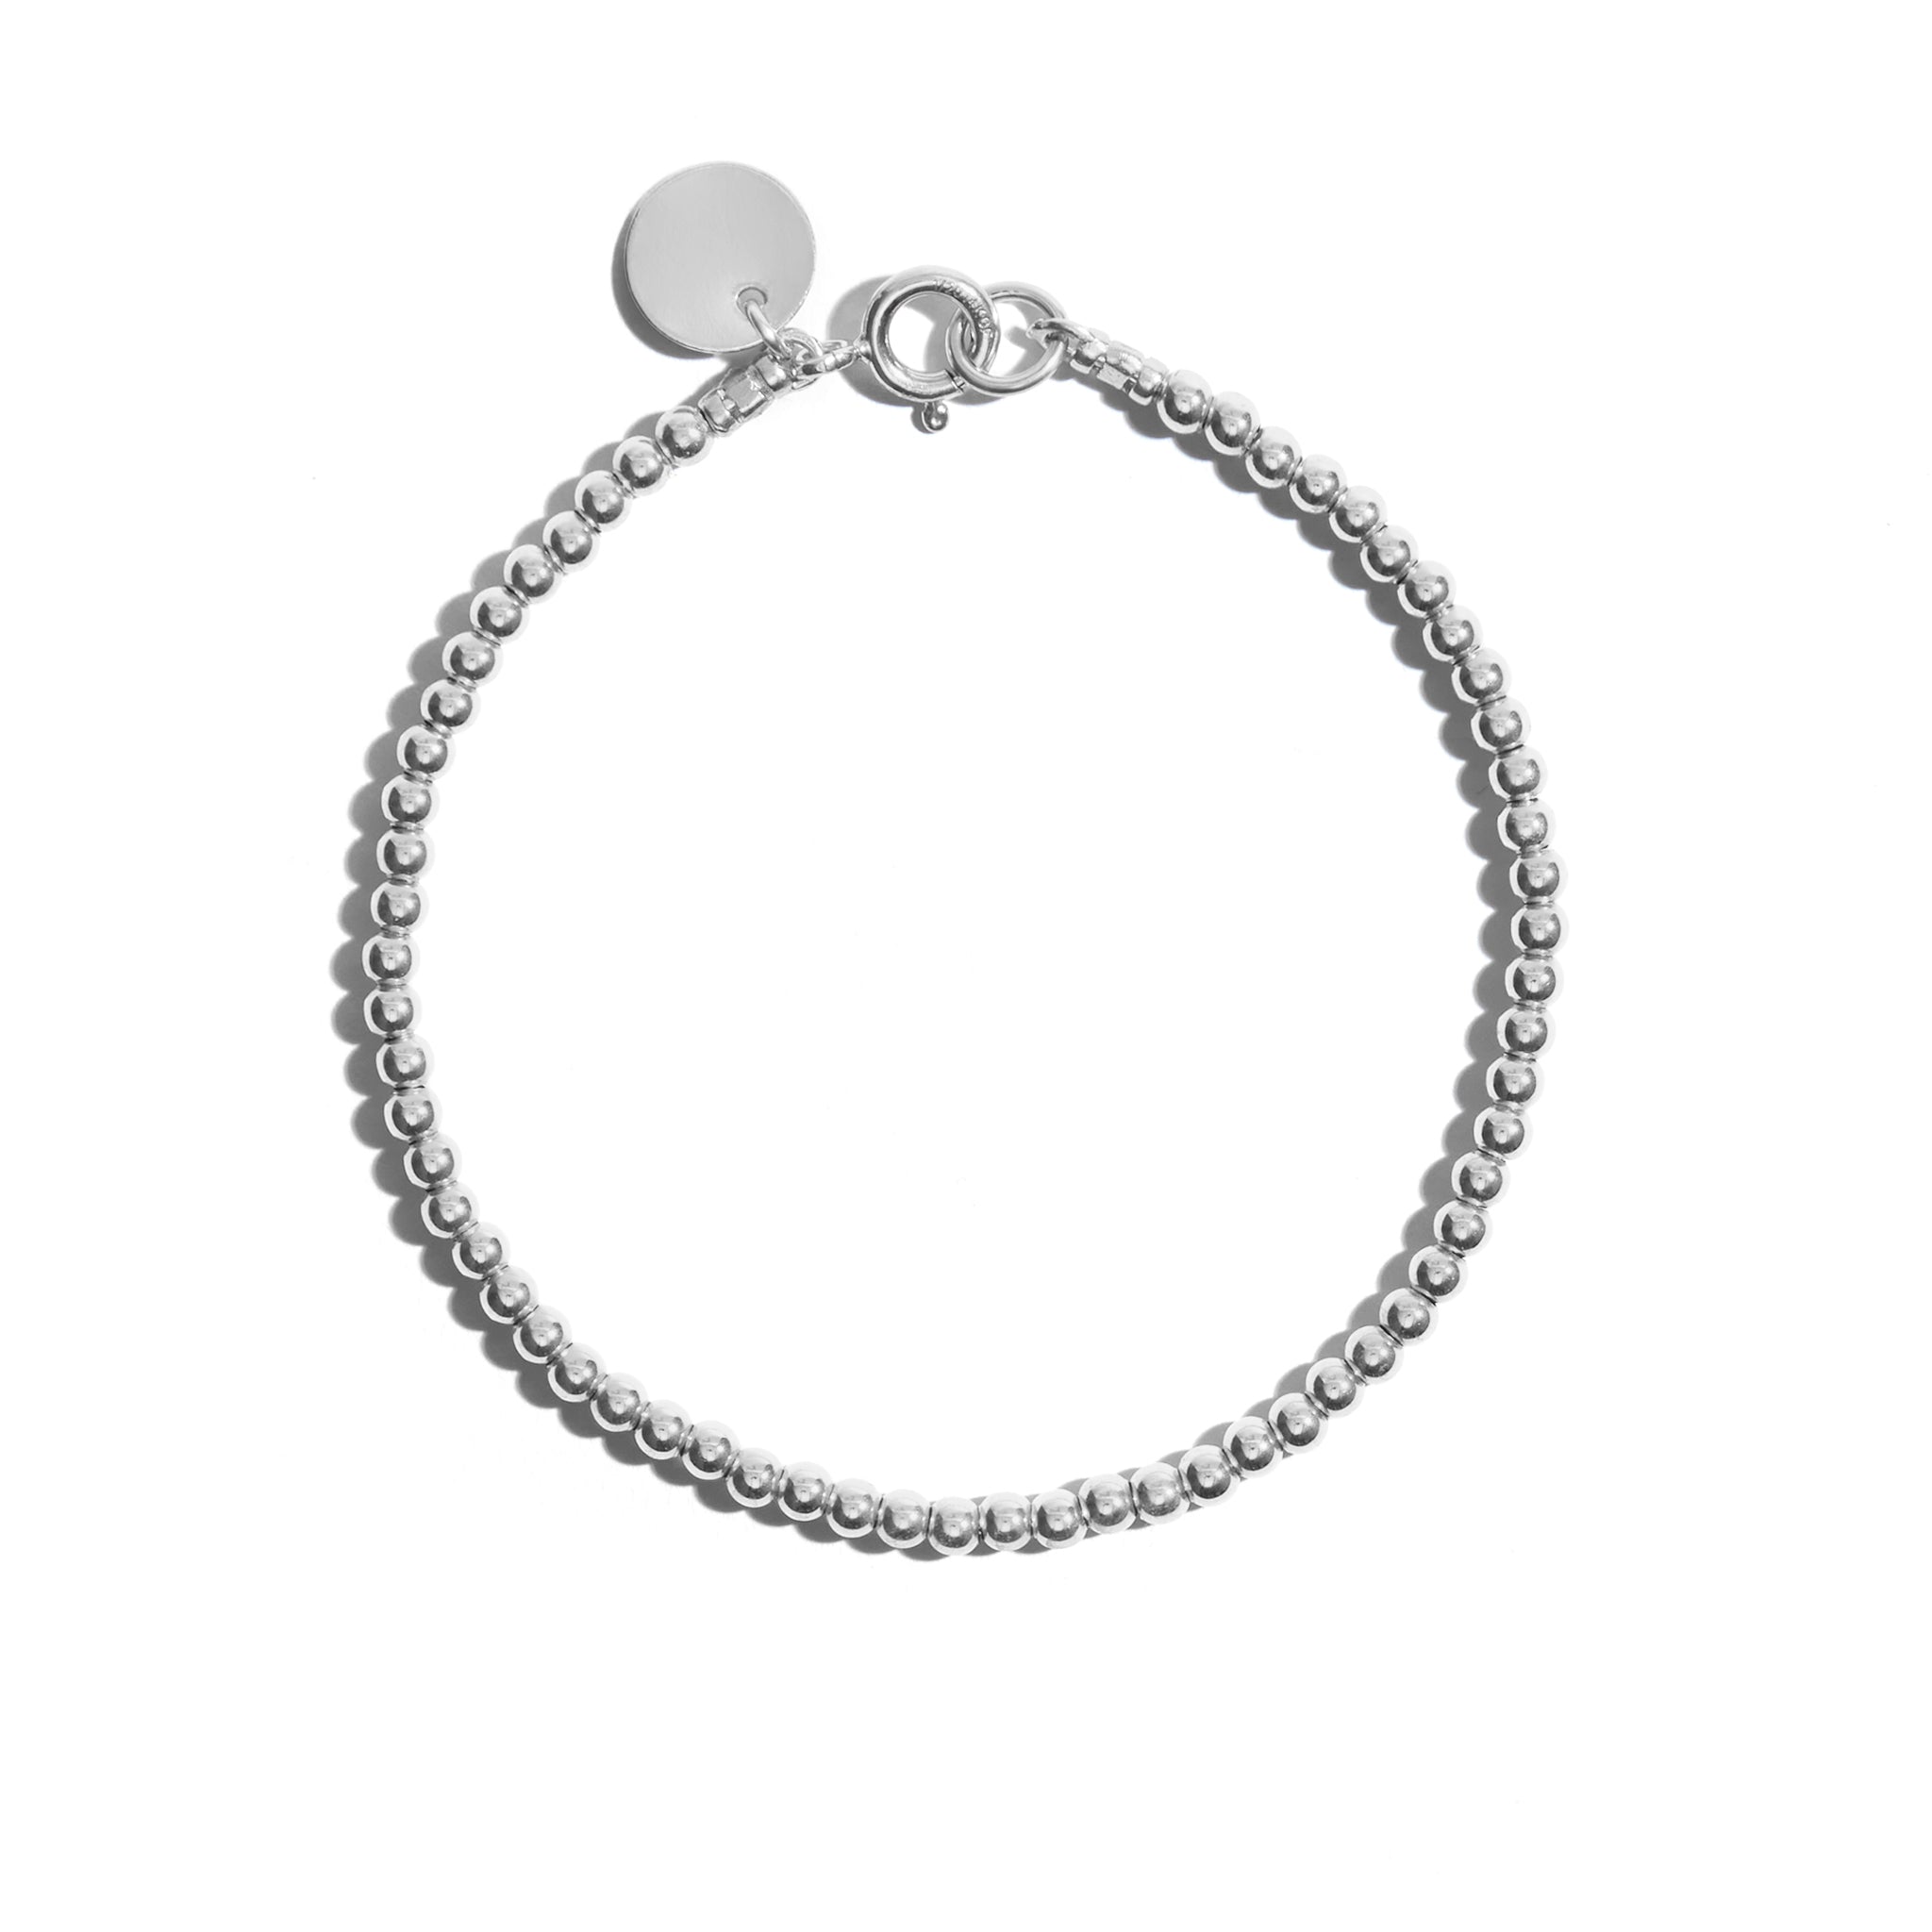 Photo of our delicate Silver Fine Bracelet crafted from sterling silver beads, perfect for adding a touch of elegance to any wrist.